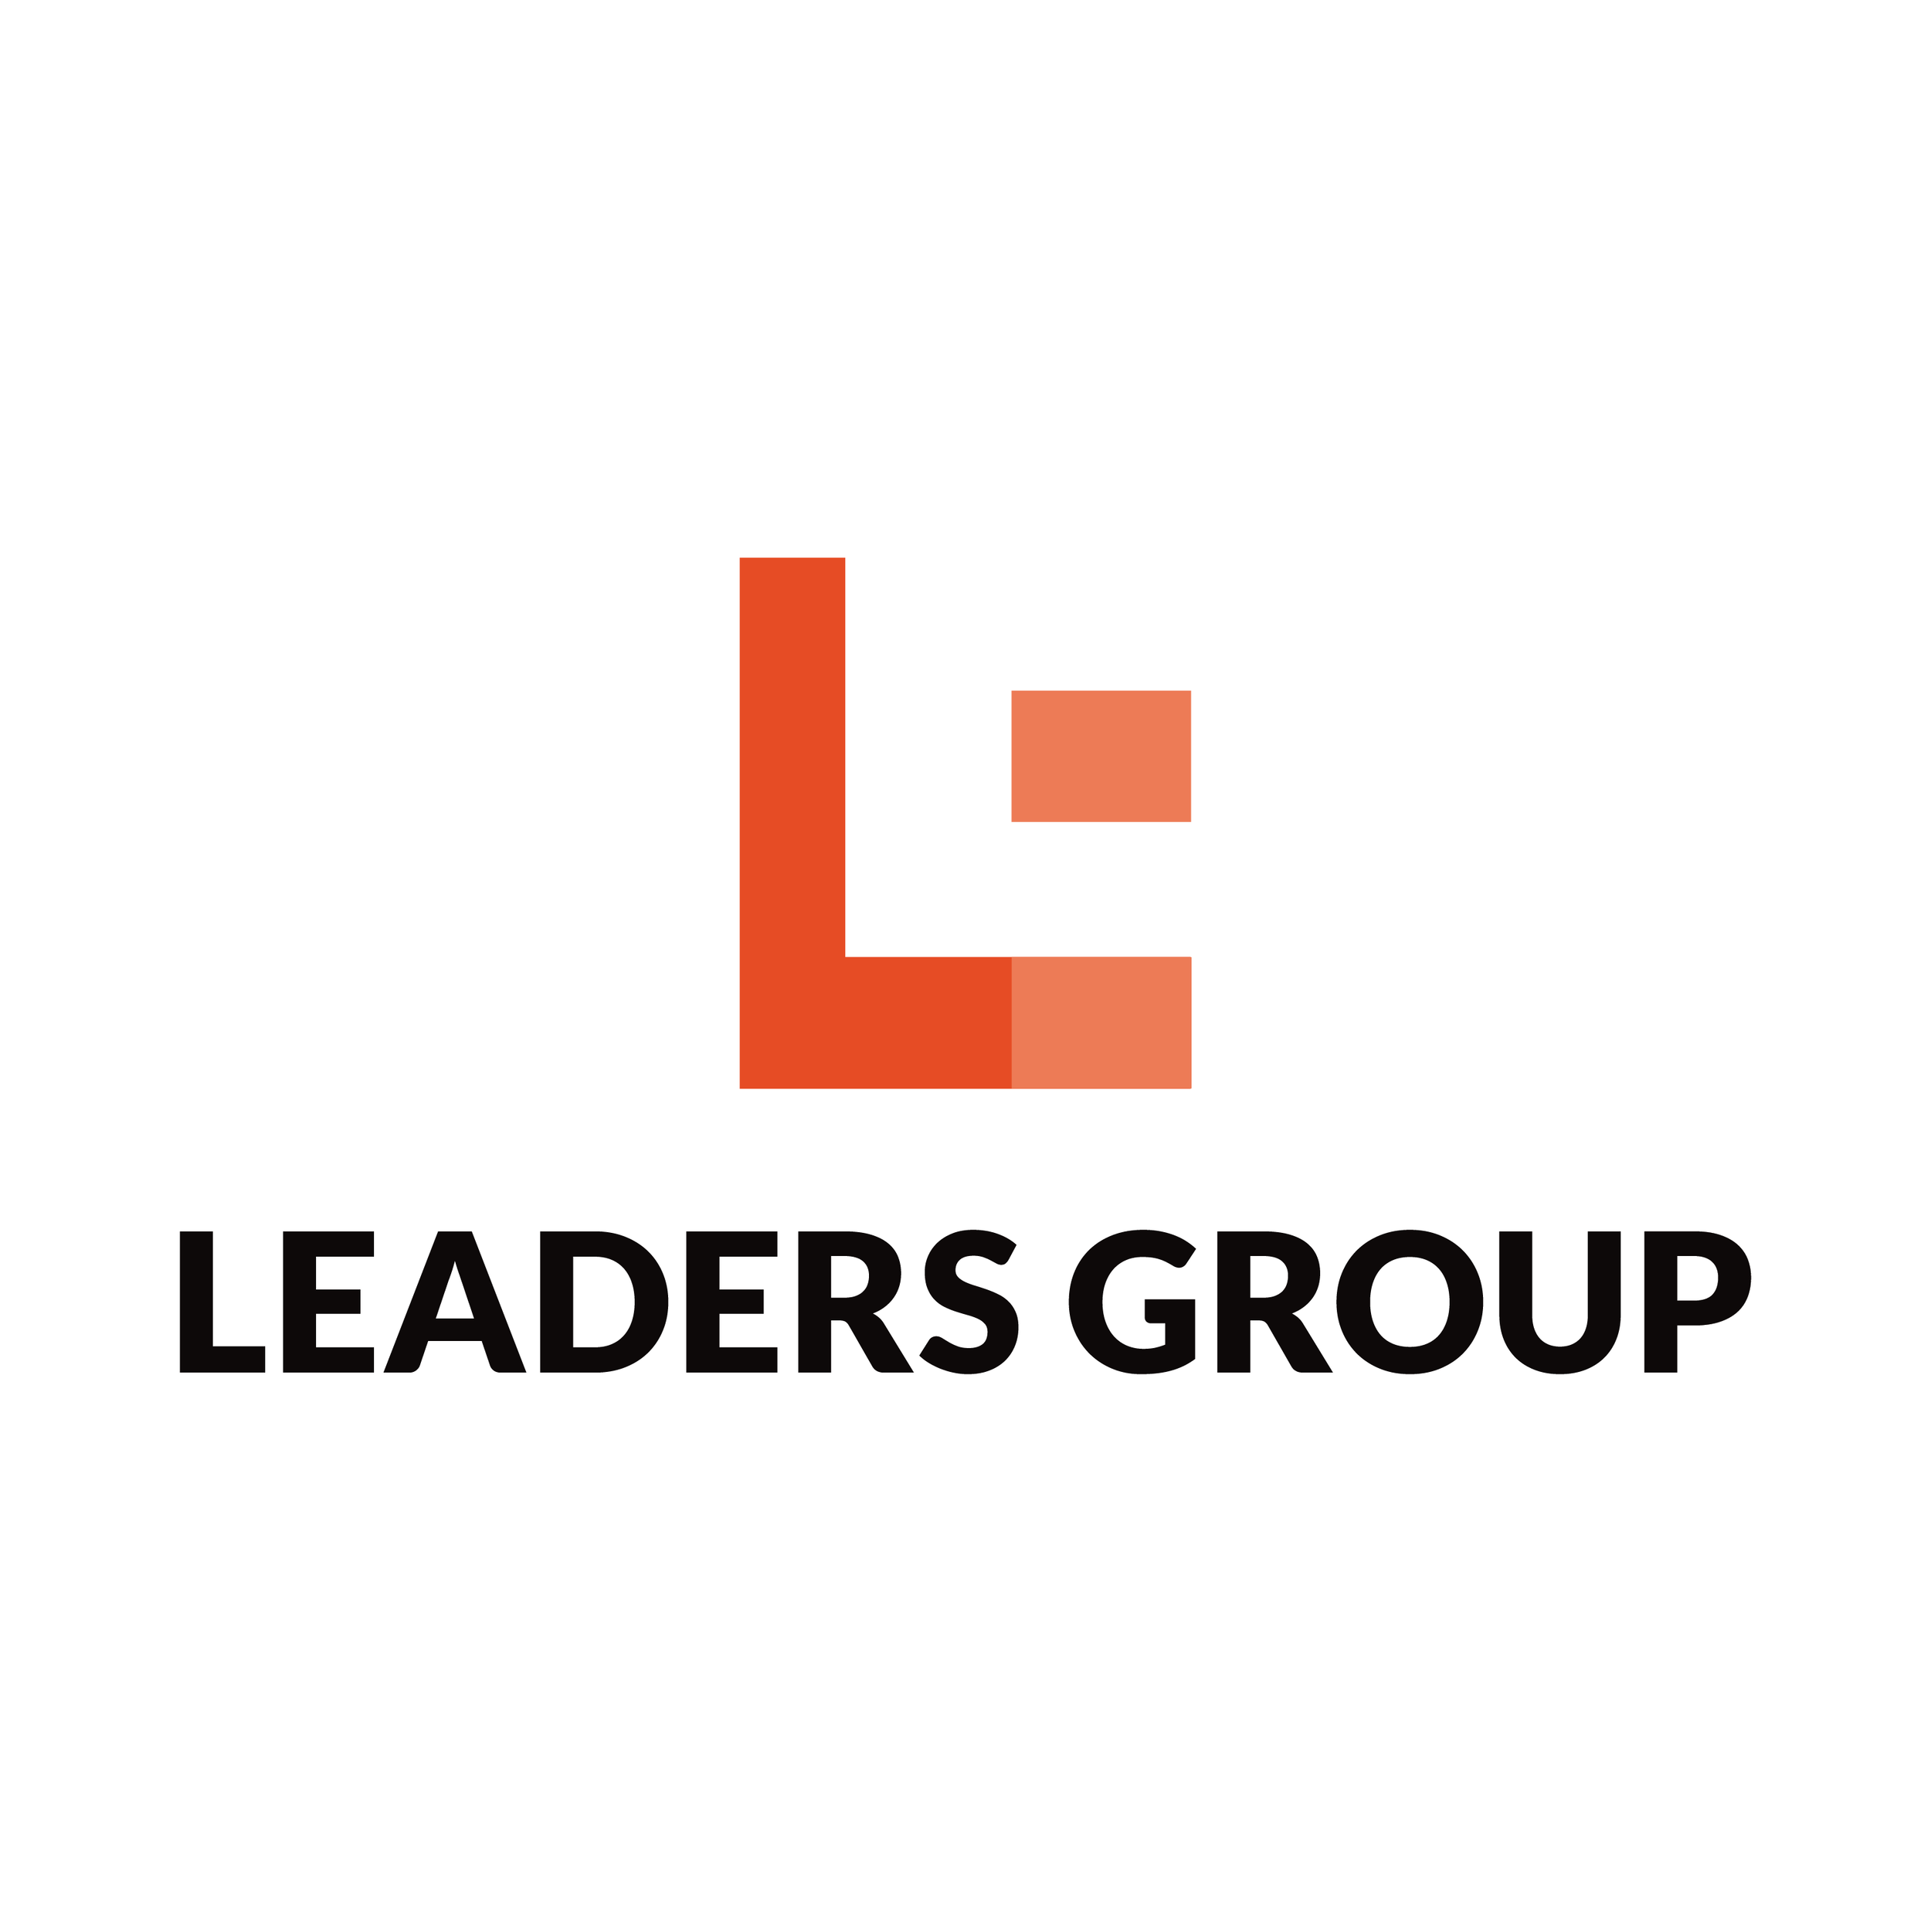 Leaders Group - Market Intelligence and Analytics, Networks, Events & Media